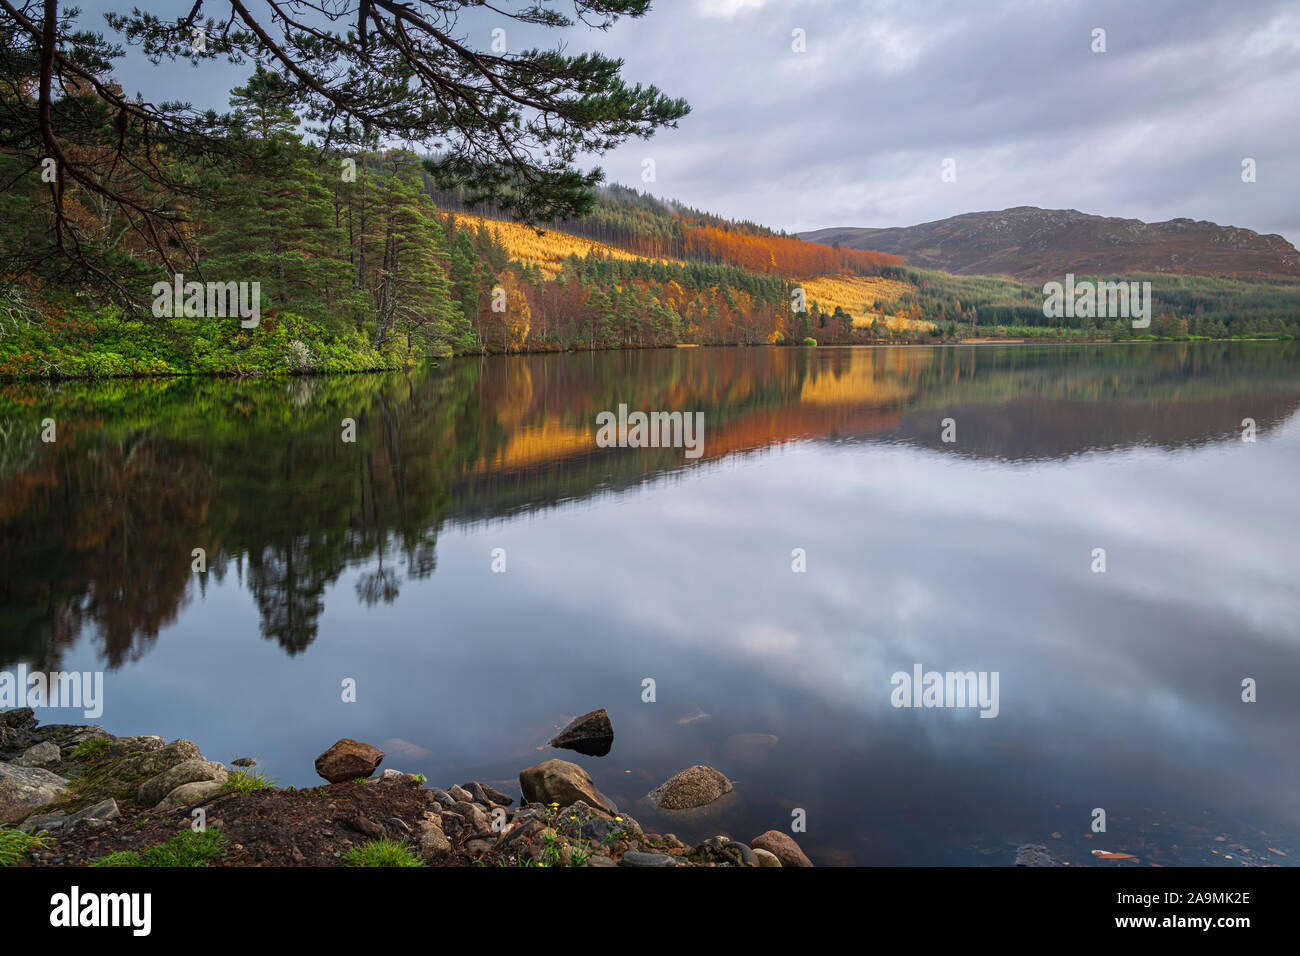 An autumnal HDR image of the reflective still waters of Loch Farr in Strathnairn, Scotland. 05 November 2019 Stock Photo